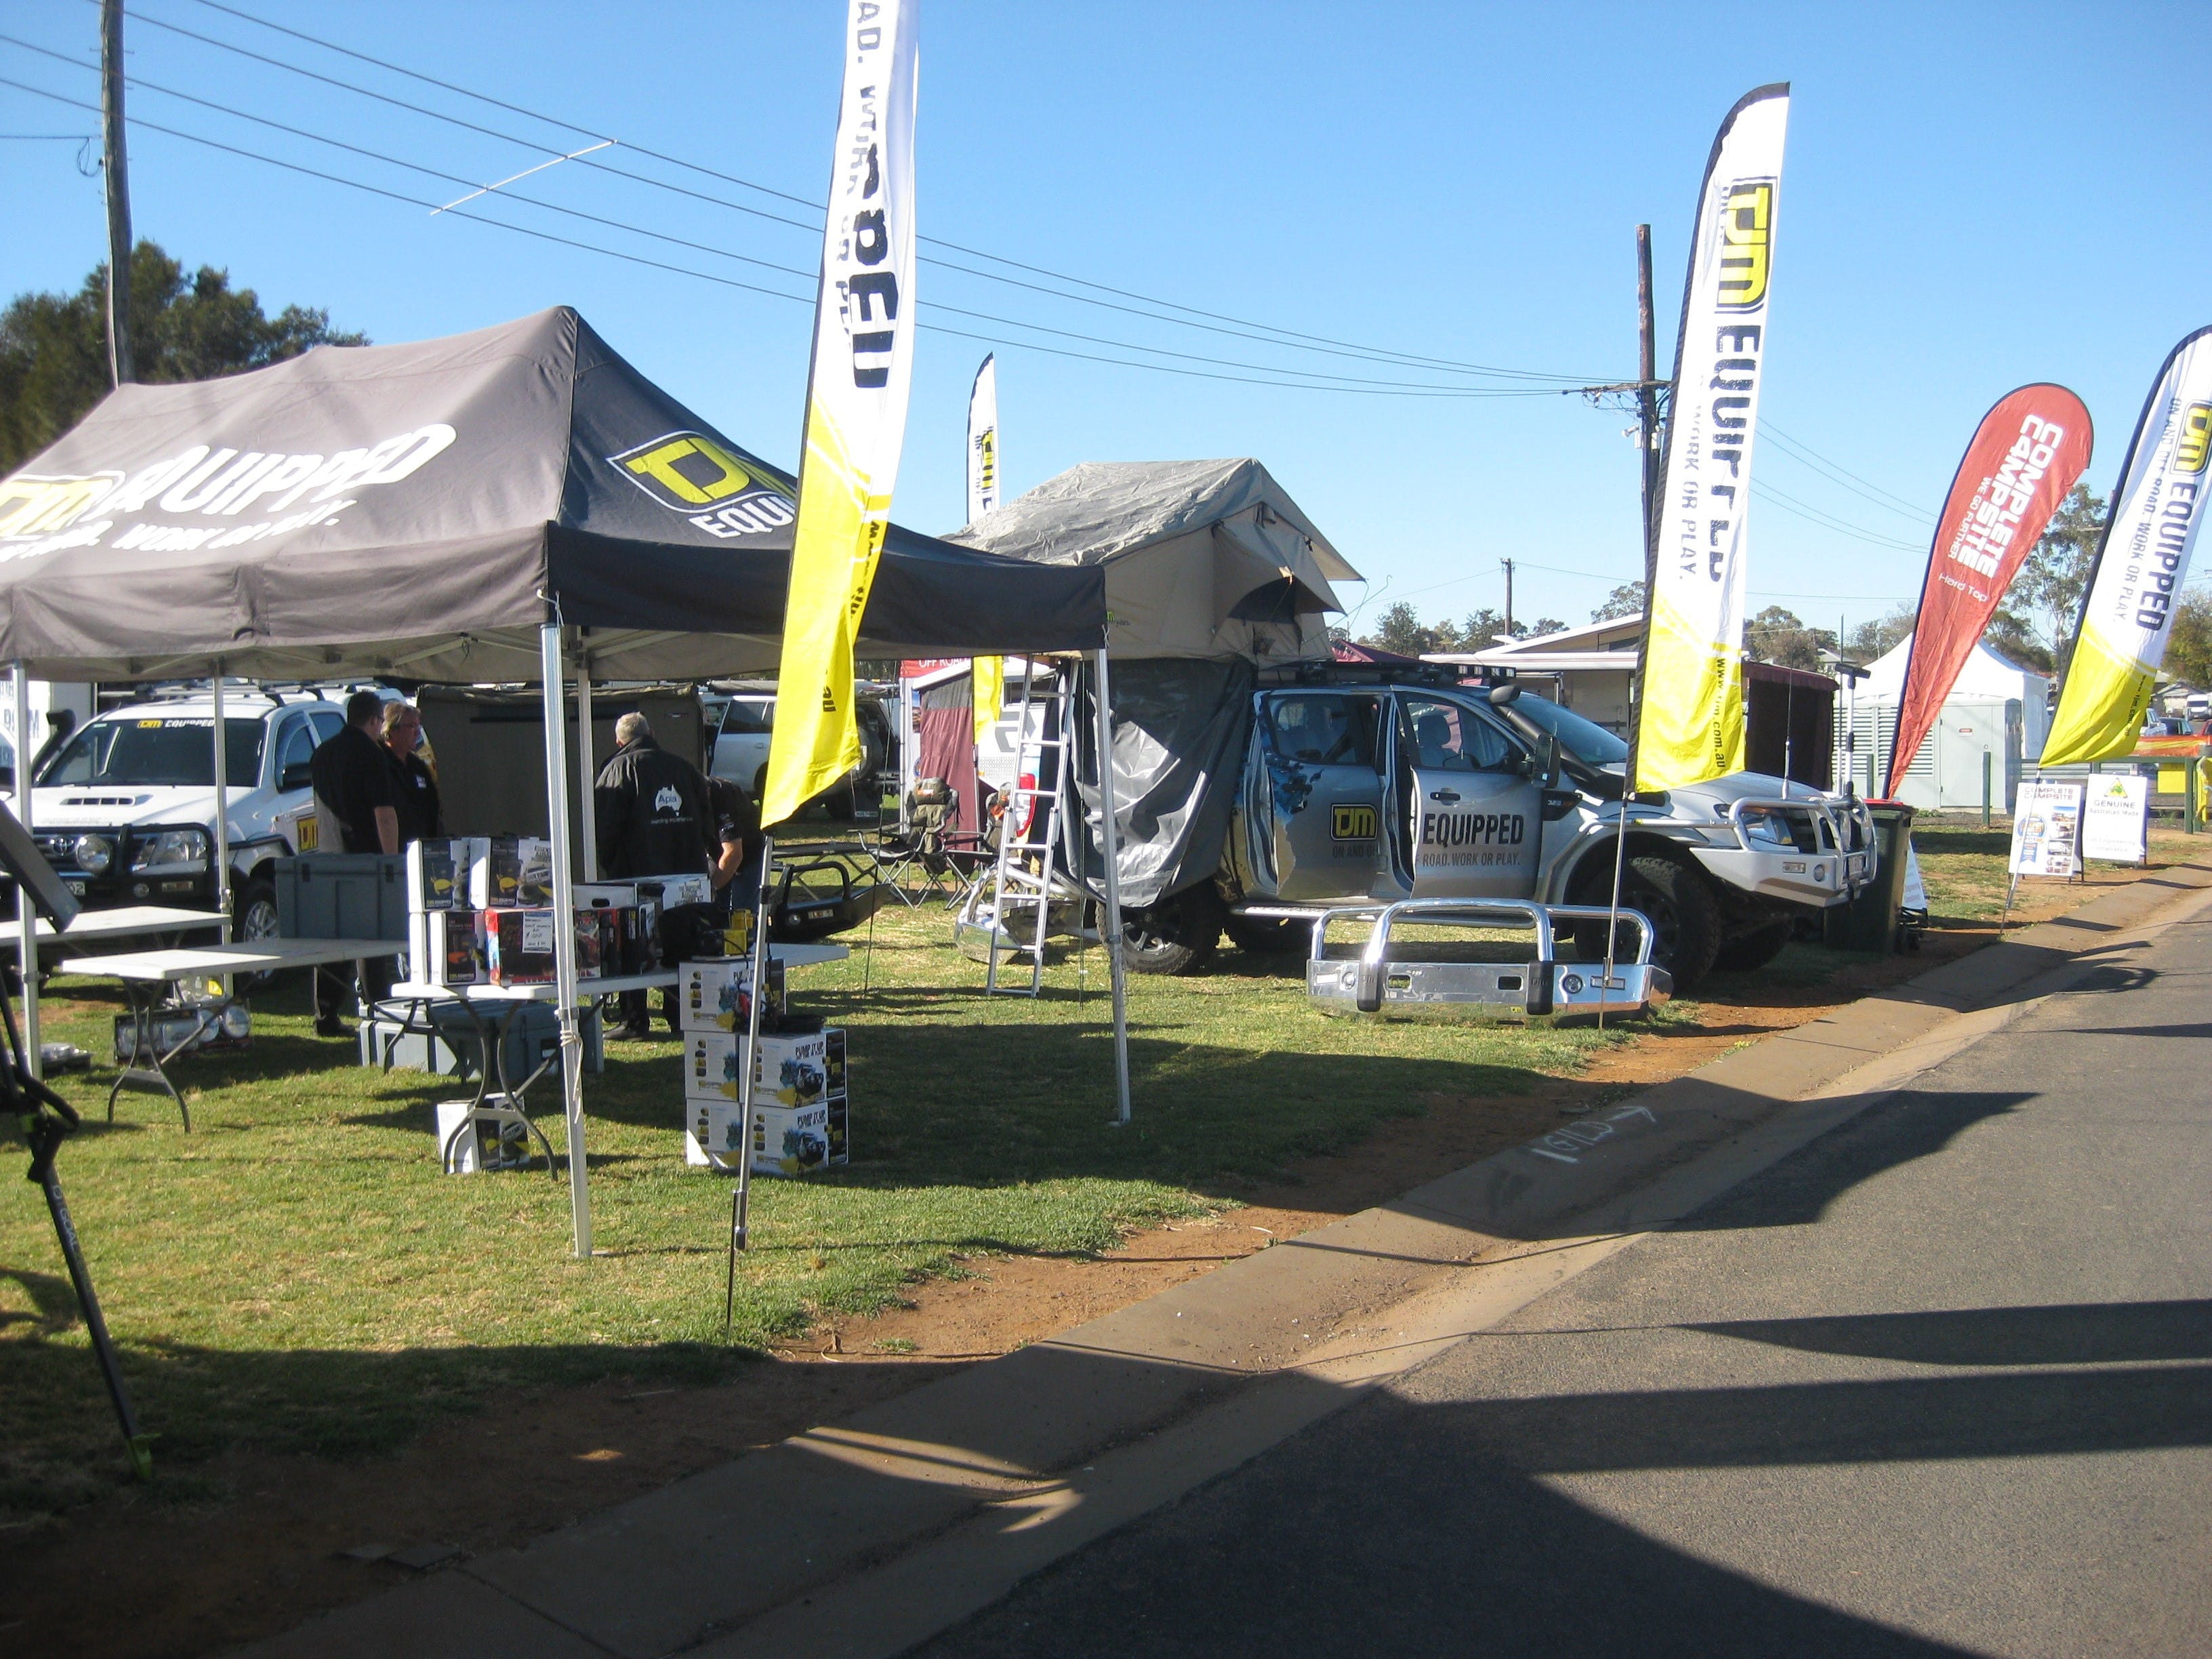 Orana Caravan Camping 4WD Fish and Boat Show - Townsville Tourism